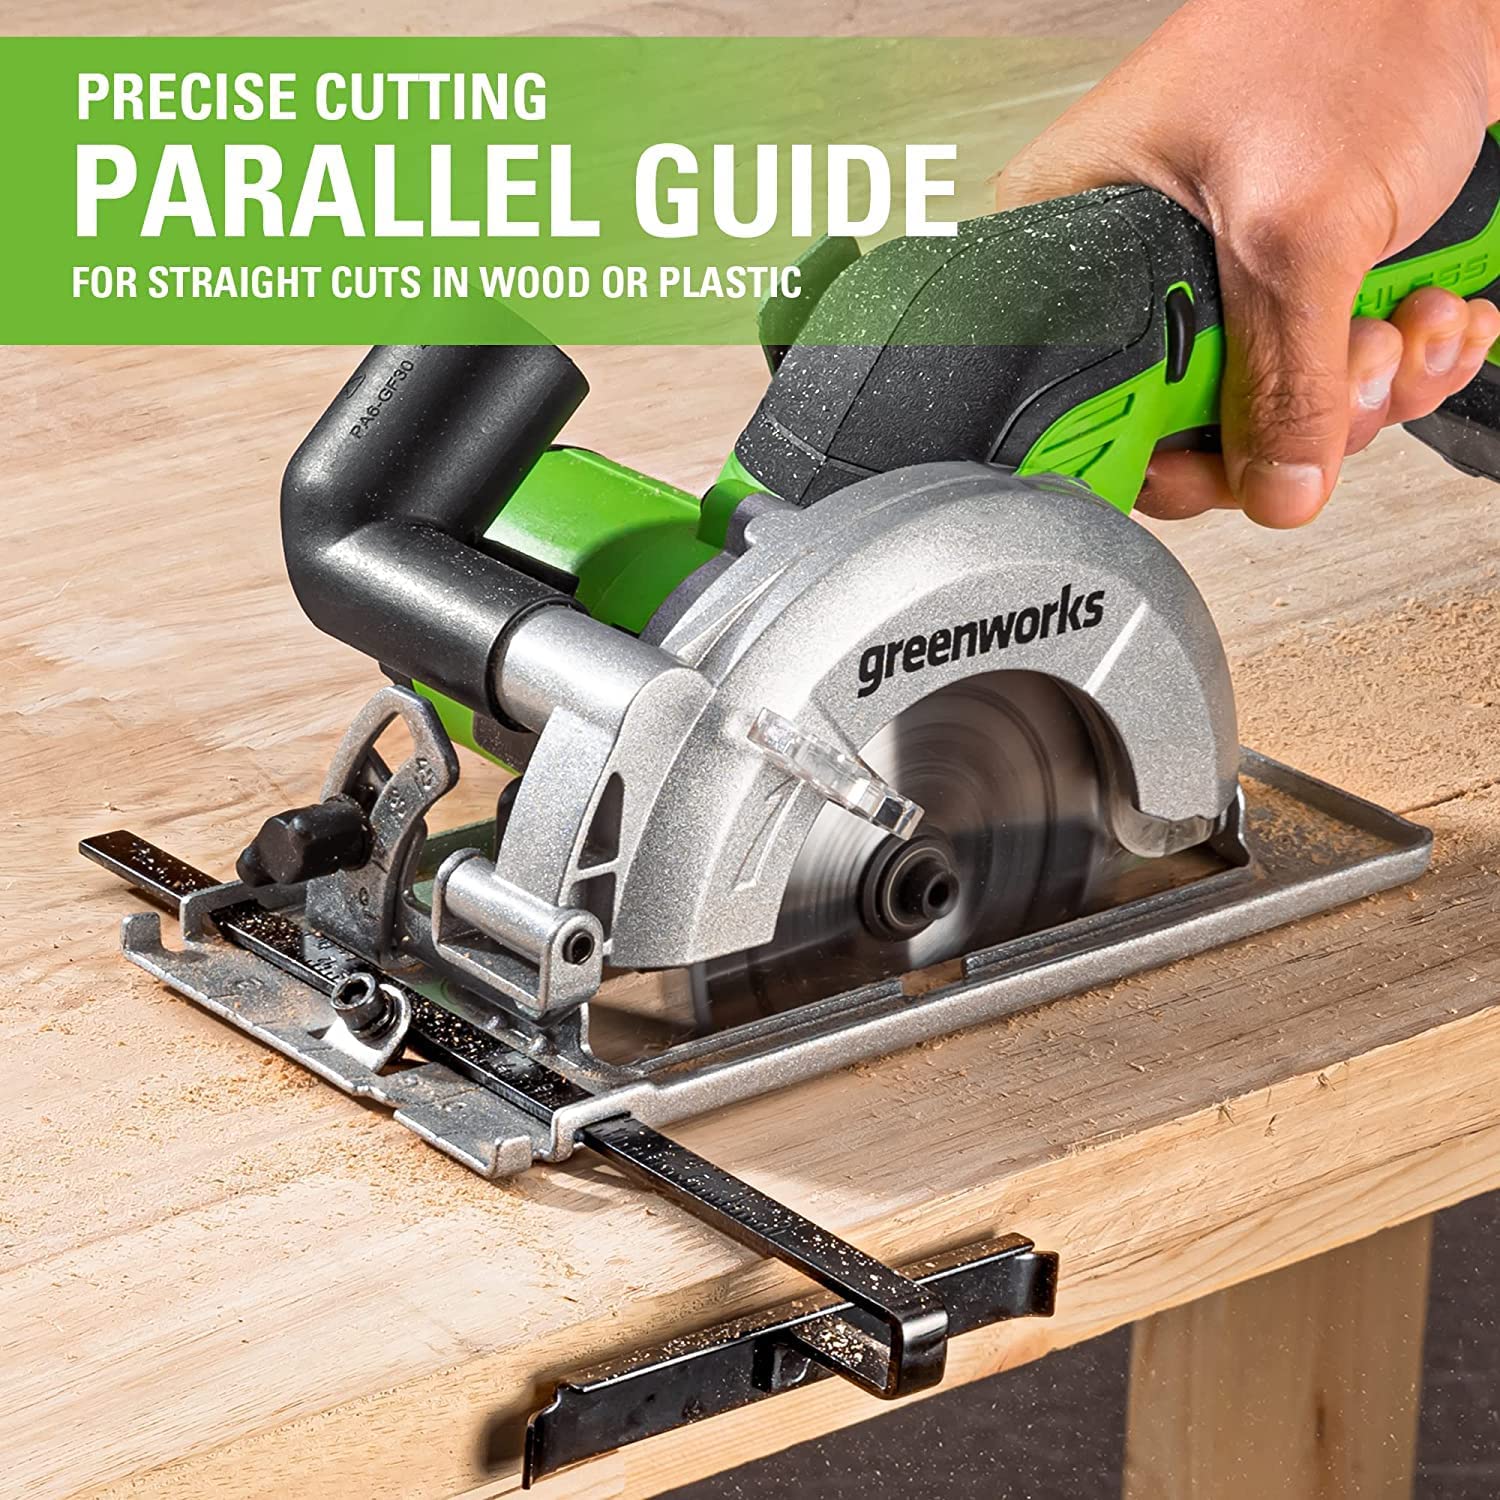 Greenworks 24V Brushless 6-1/2 Circular Saw Kit with 24V 2Ah Battery and Charger